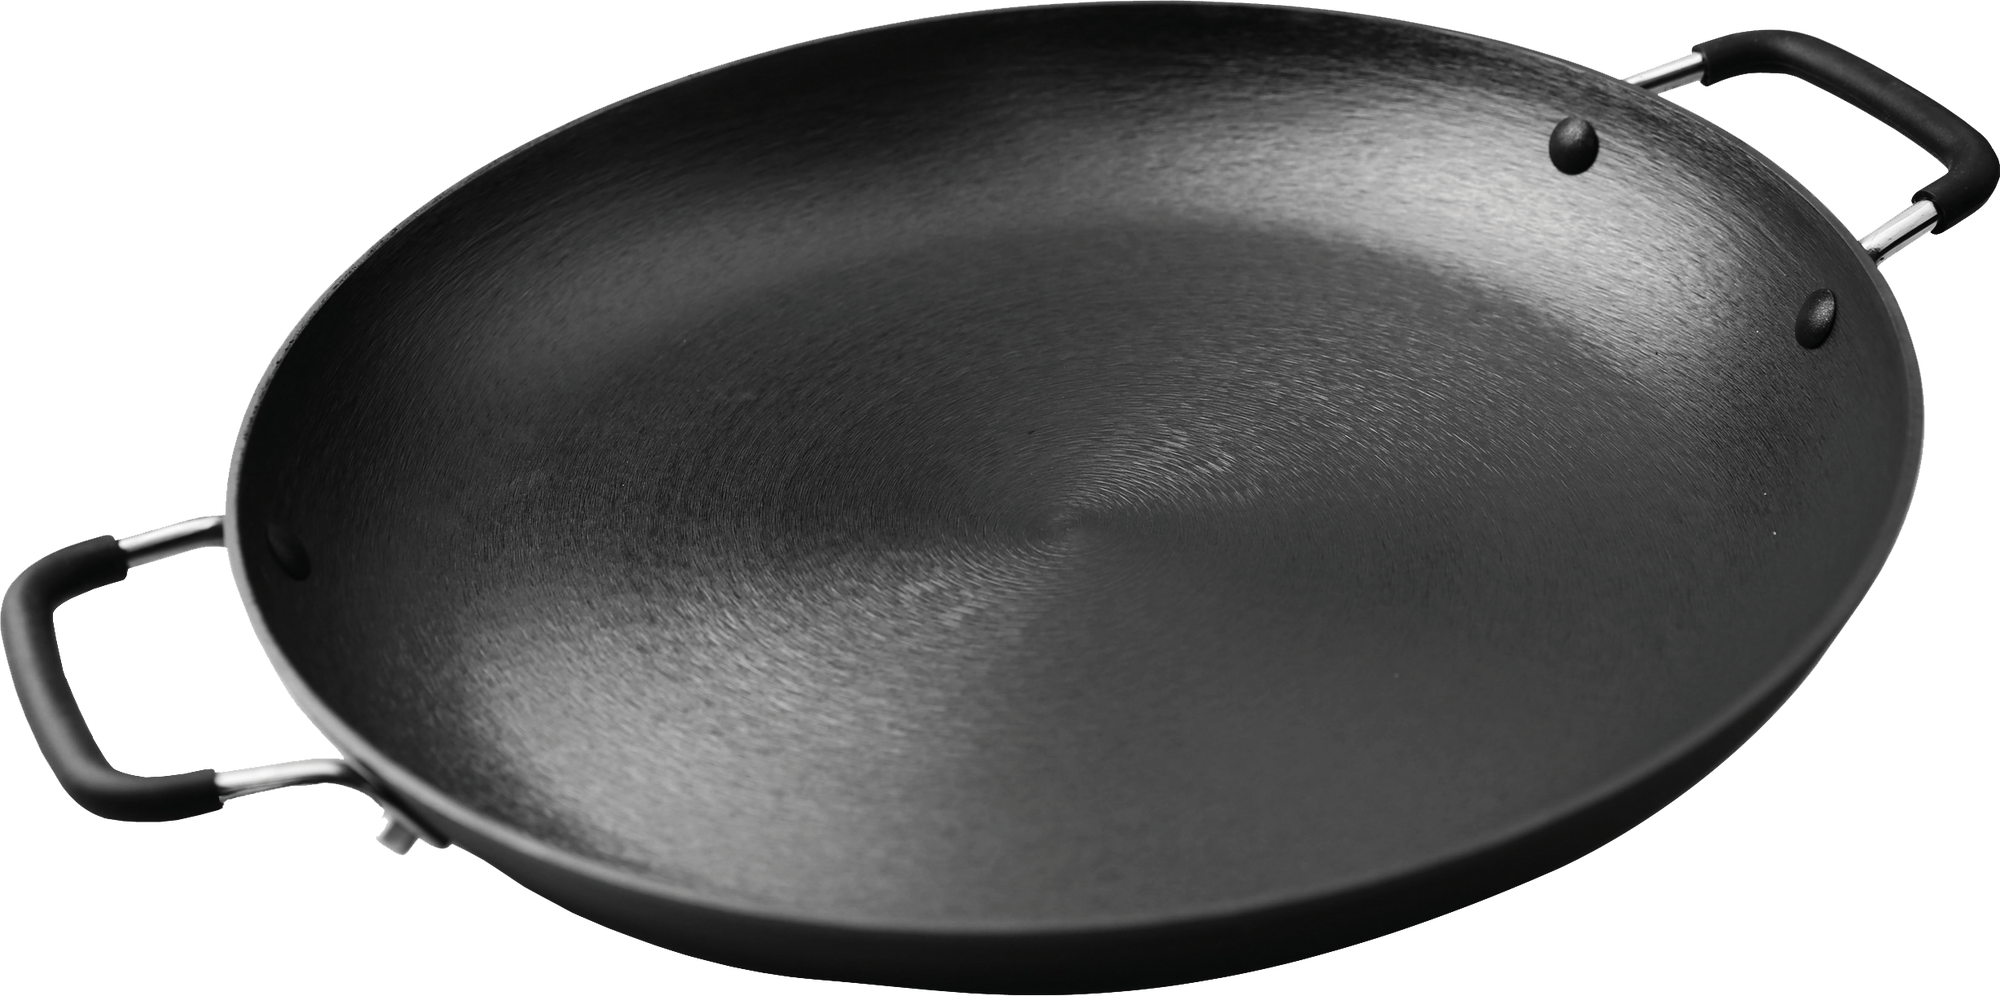 Paella Ultra-Light Cast Iron Fry Pan with Silicone-Coated Handles (14 ¼” diameter).